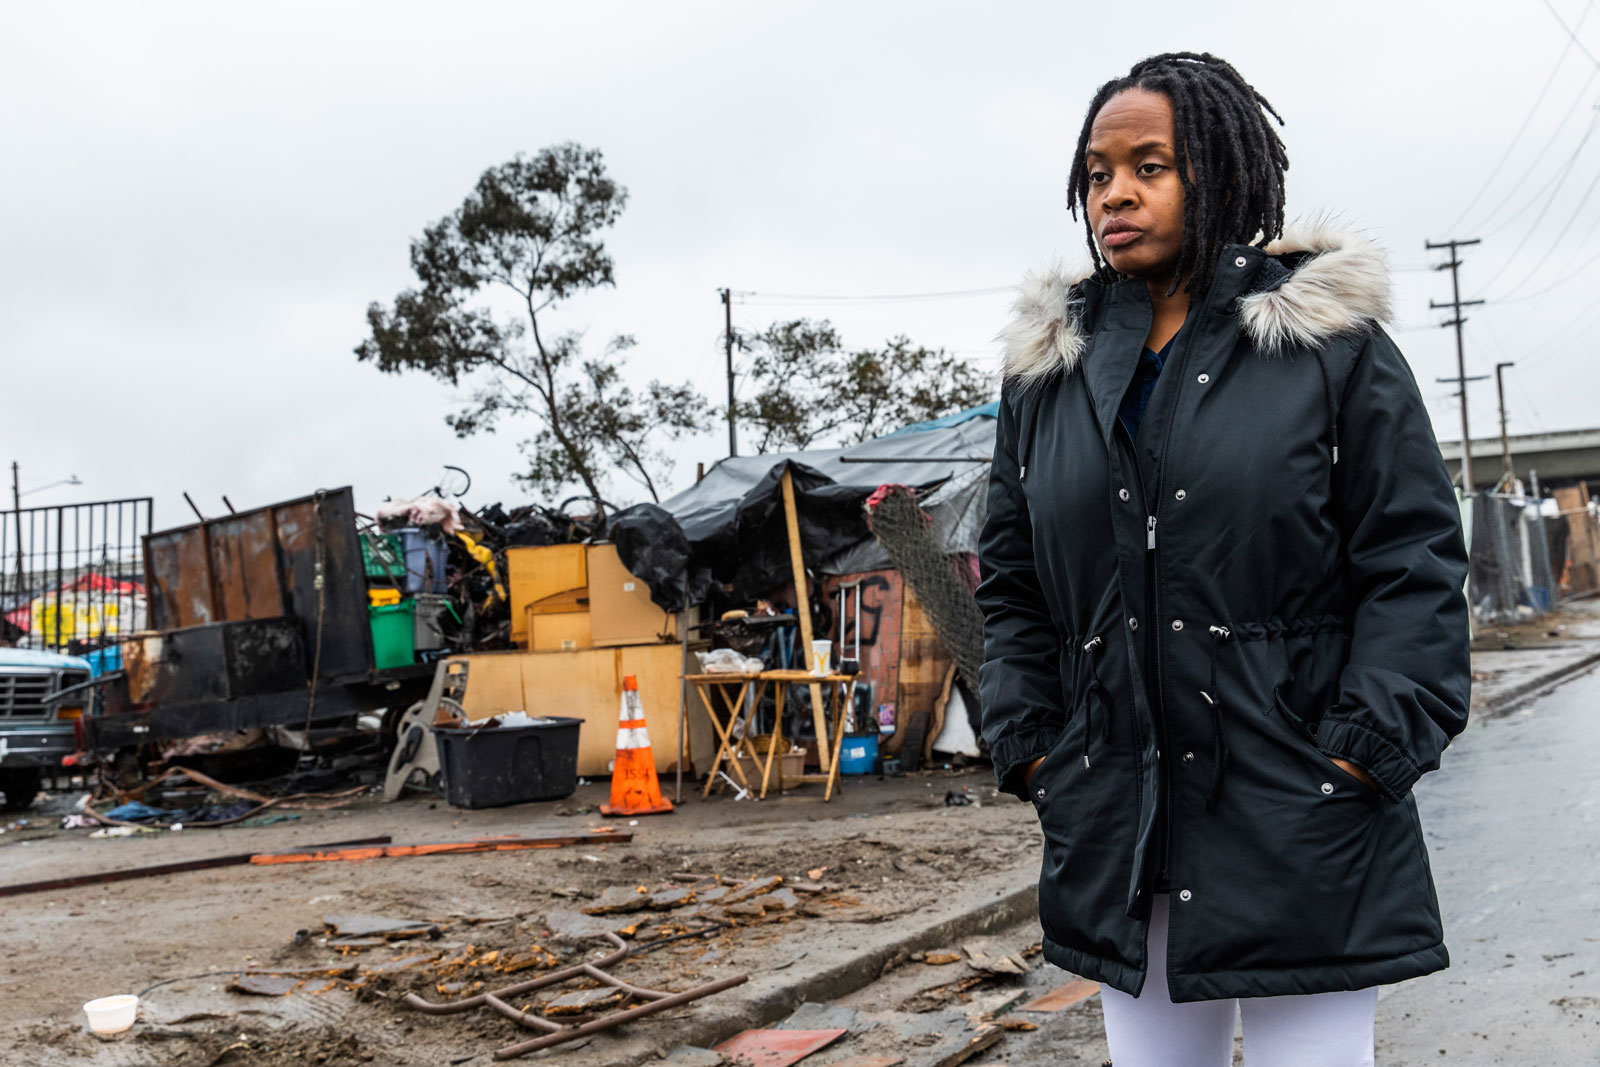 Carroll Fife, director of the Oakland chapter of the Alliance of Californians for Community Empowerment and a representative of Moms 4 Housing, in front of a homeless encampment in Oakland, California, January 28, 2020